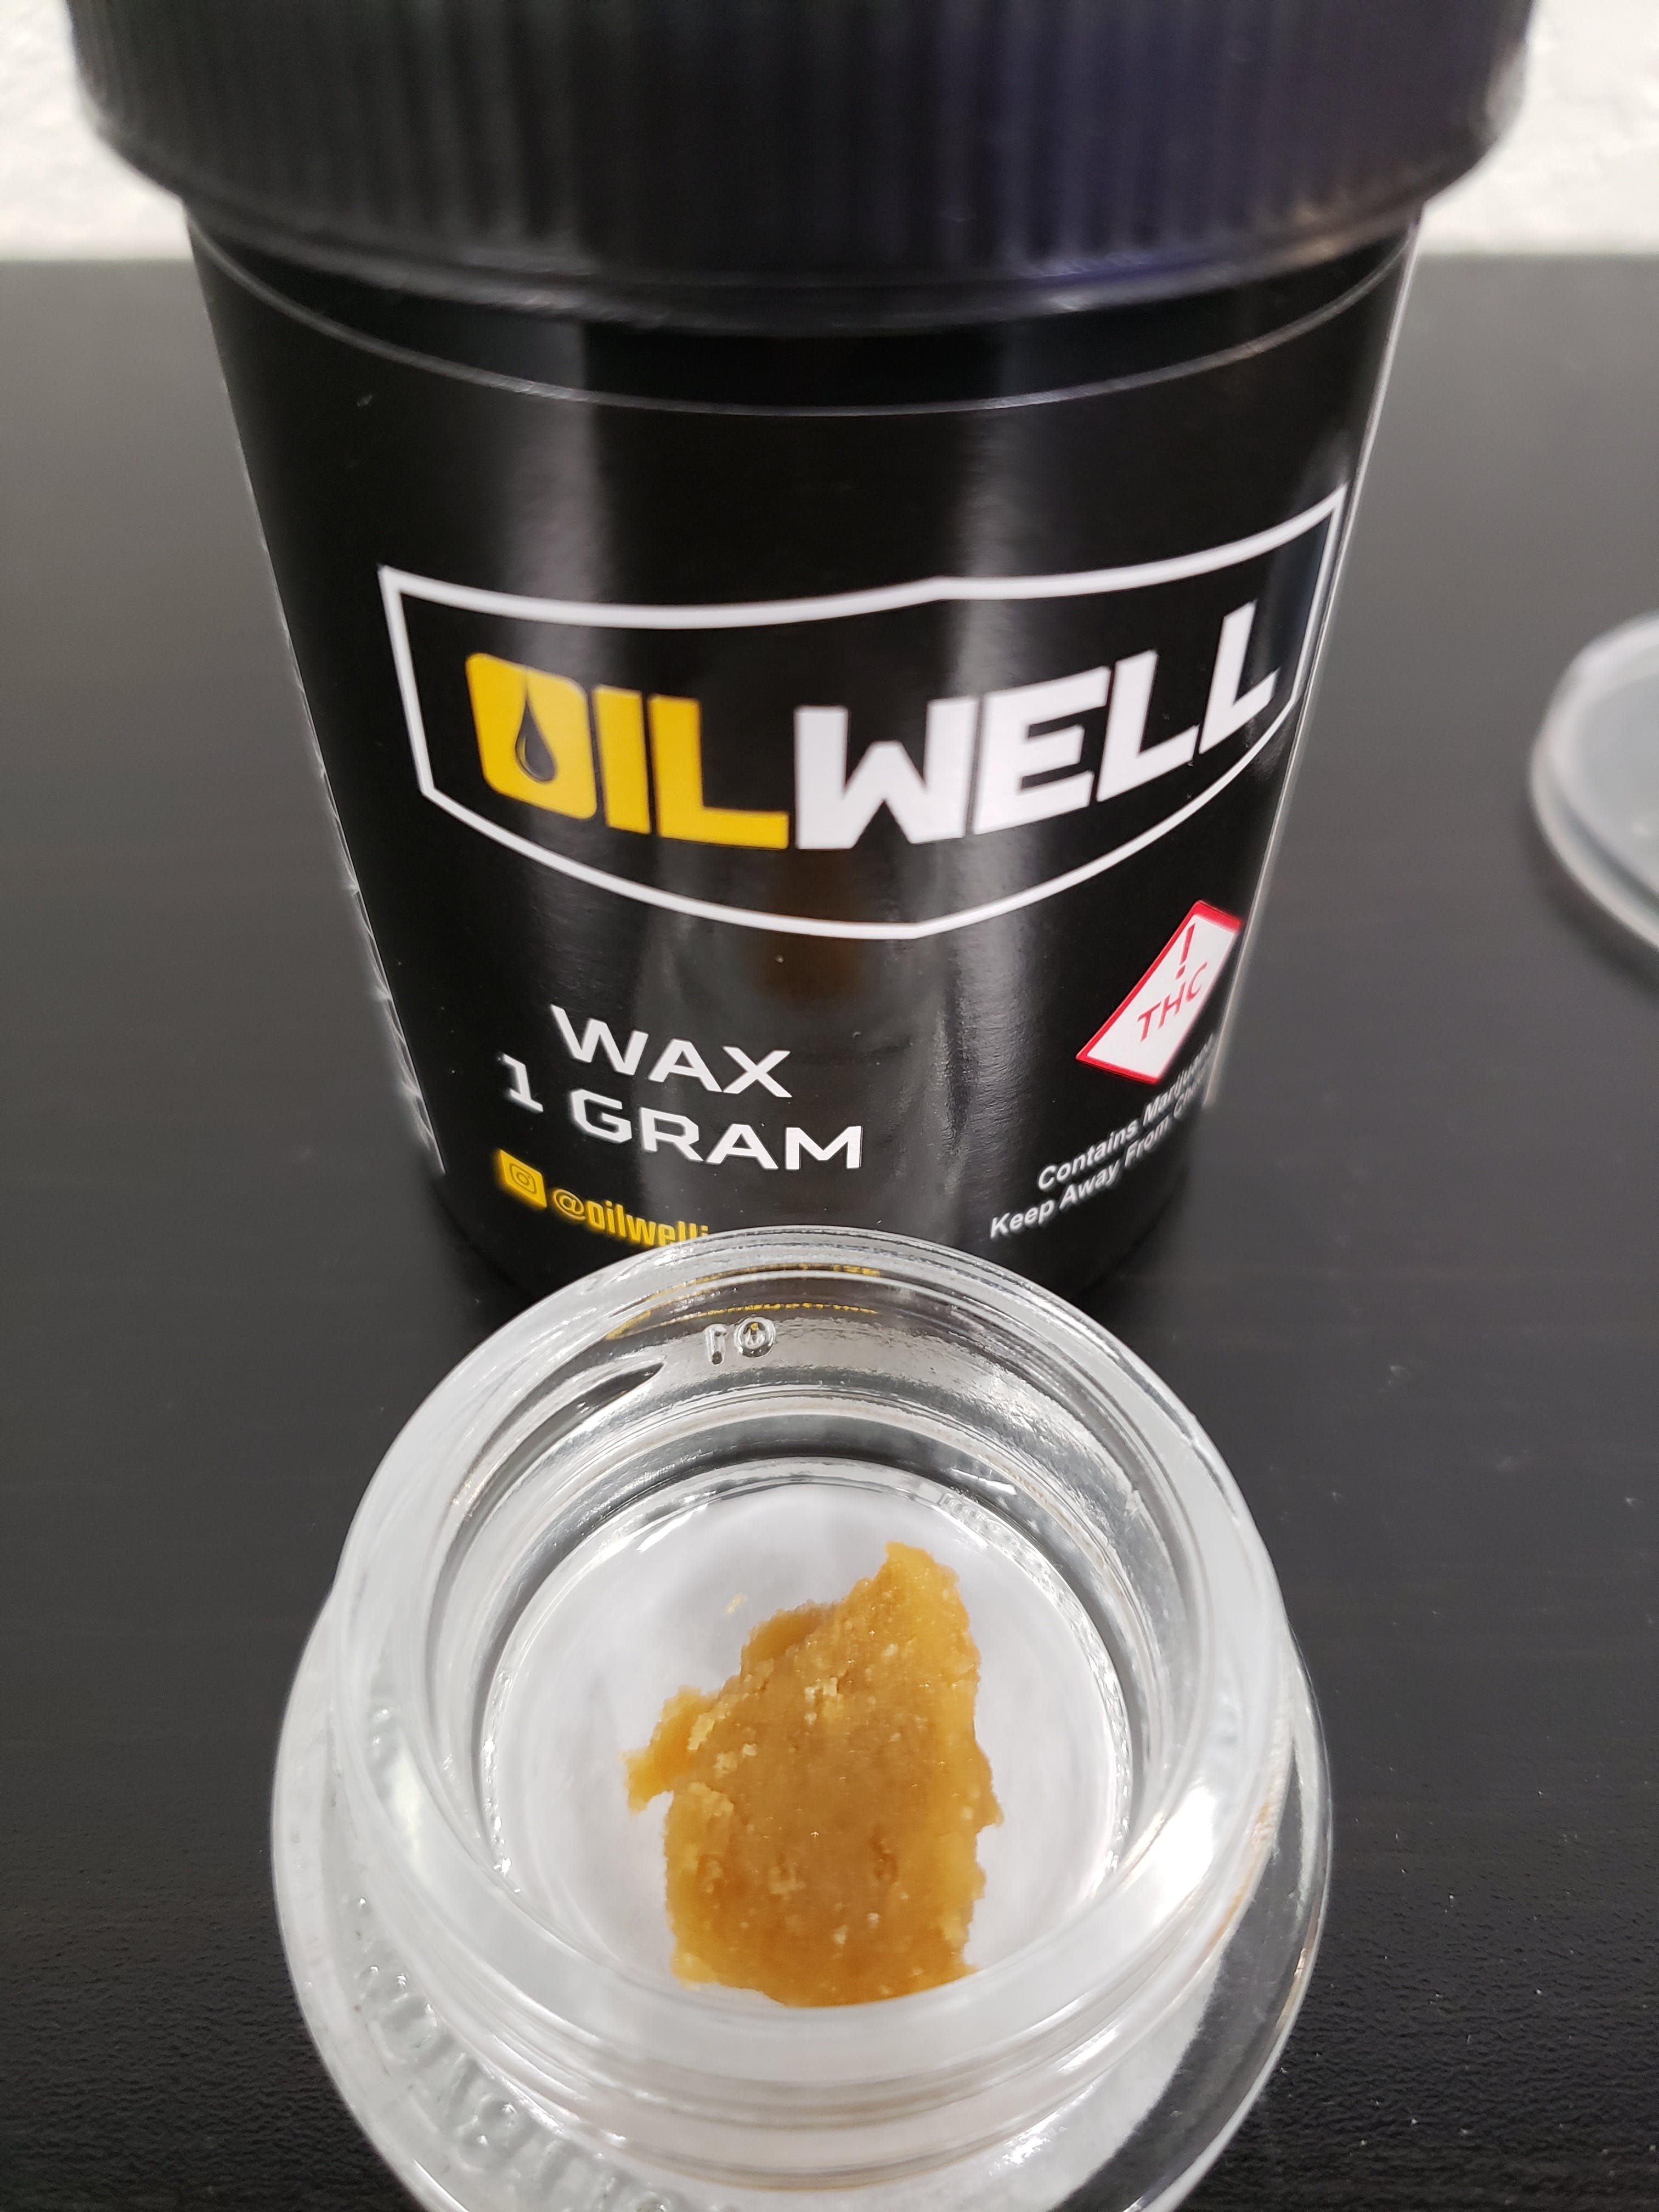 concentrate-oil-well-wax